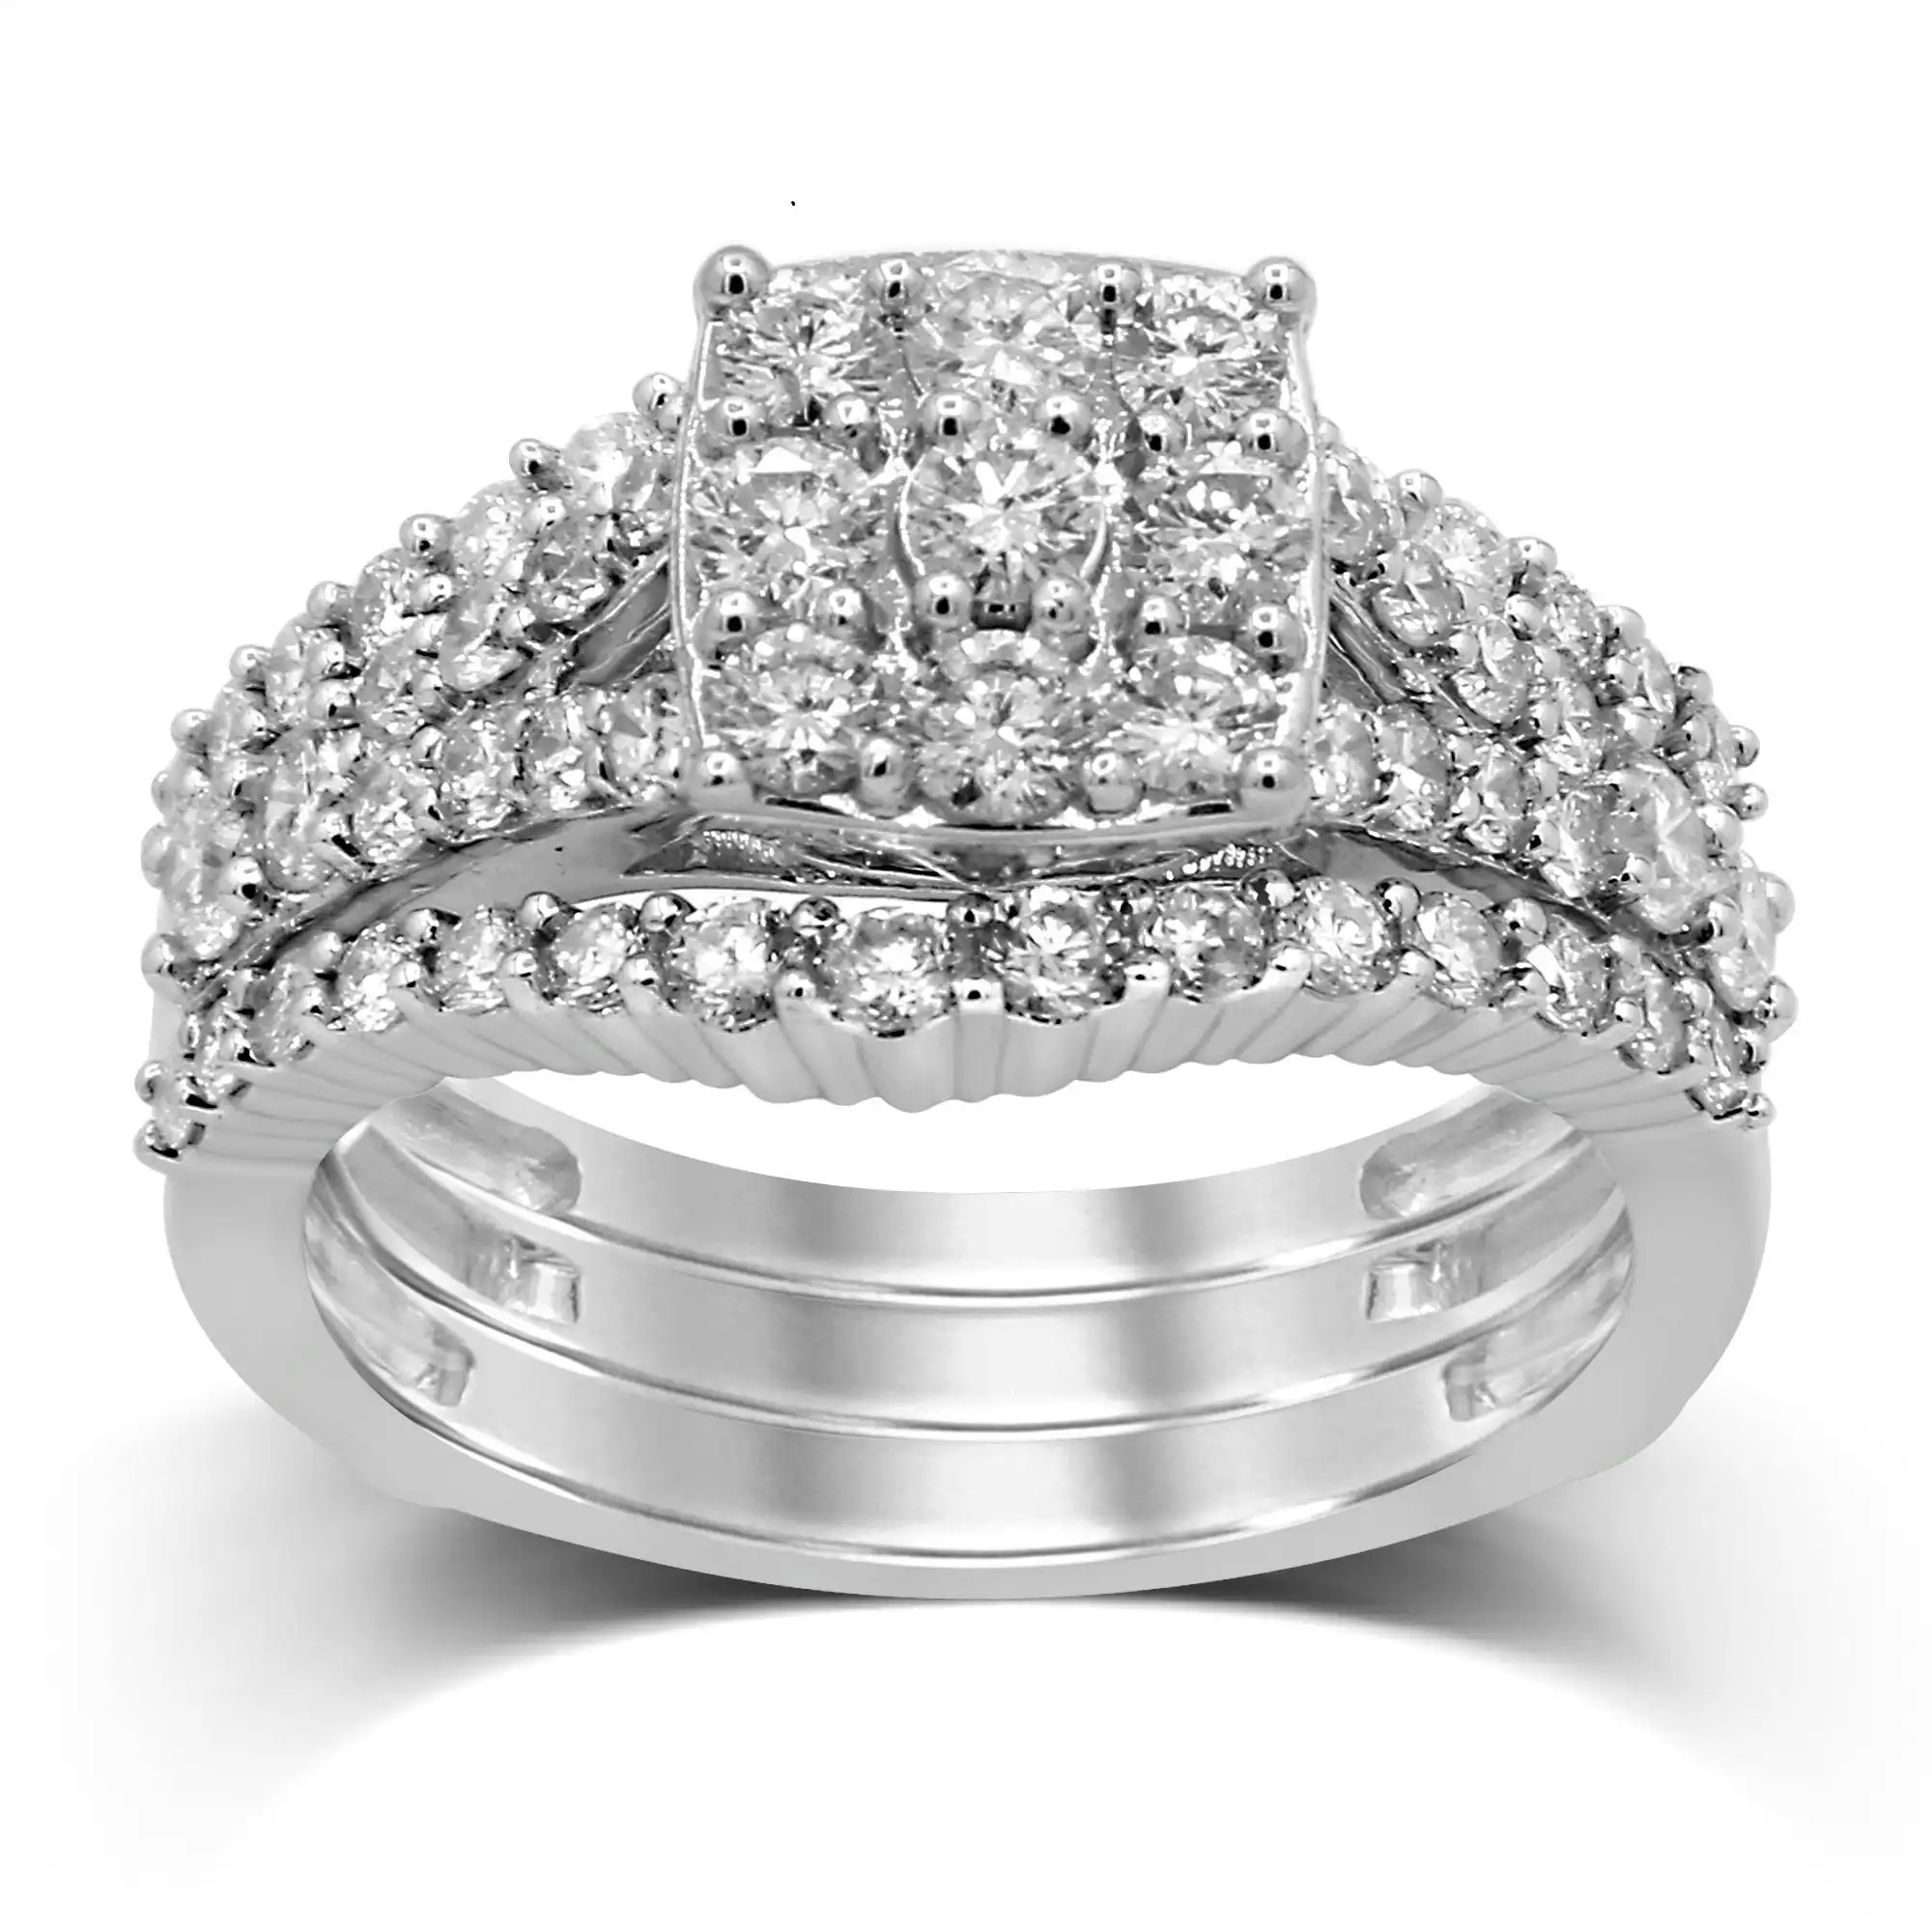 Three Ring Set with 1.30ct of Diamonds in 9ct White Gold